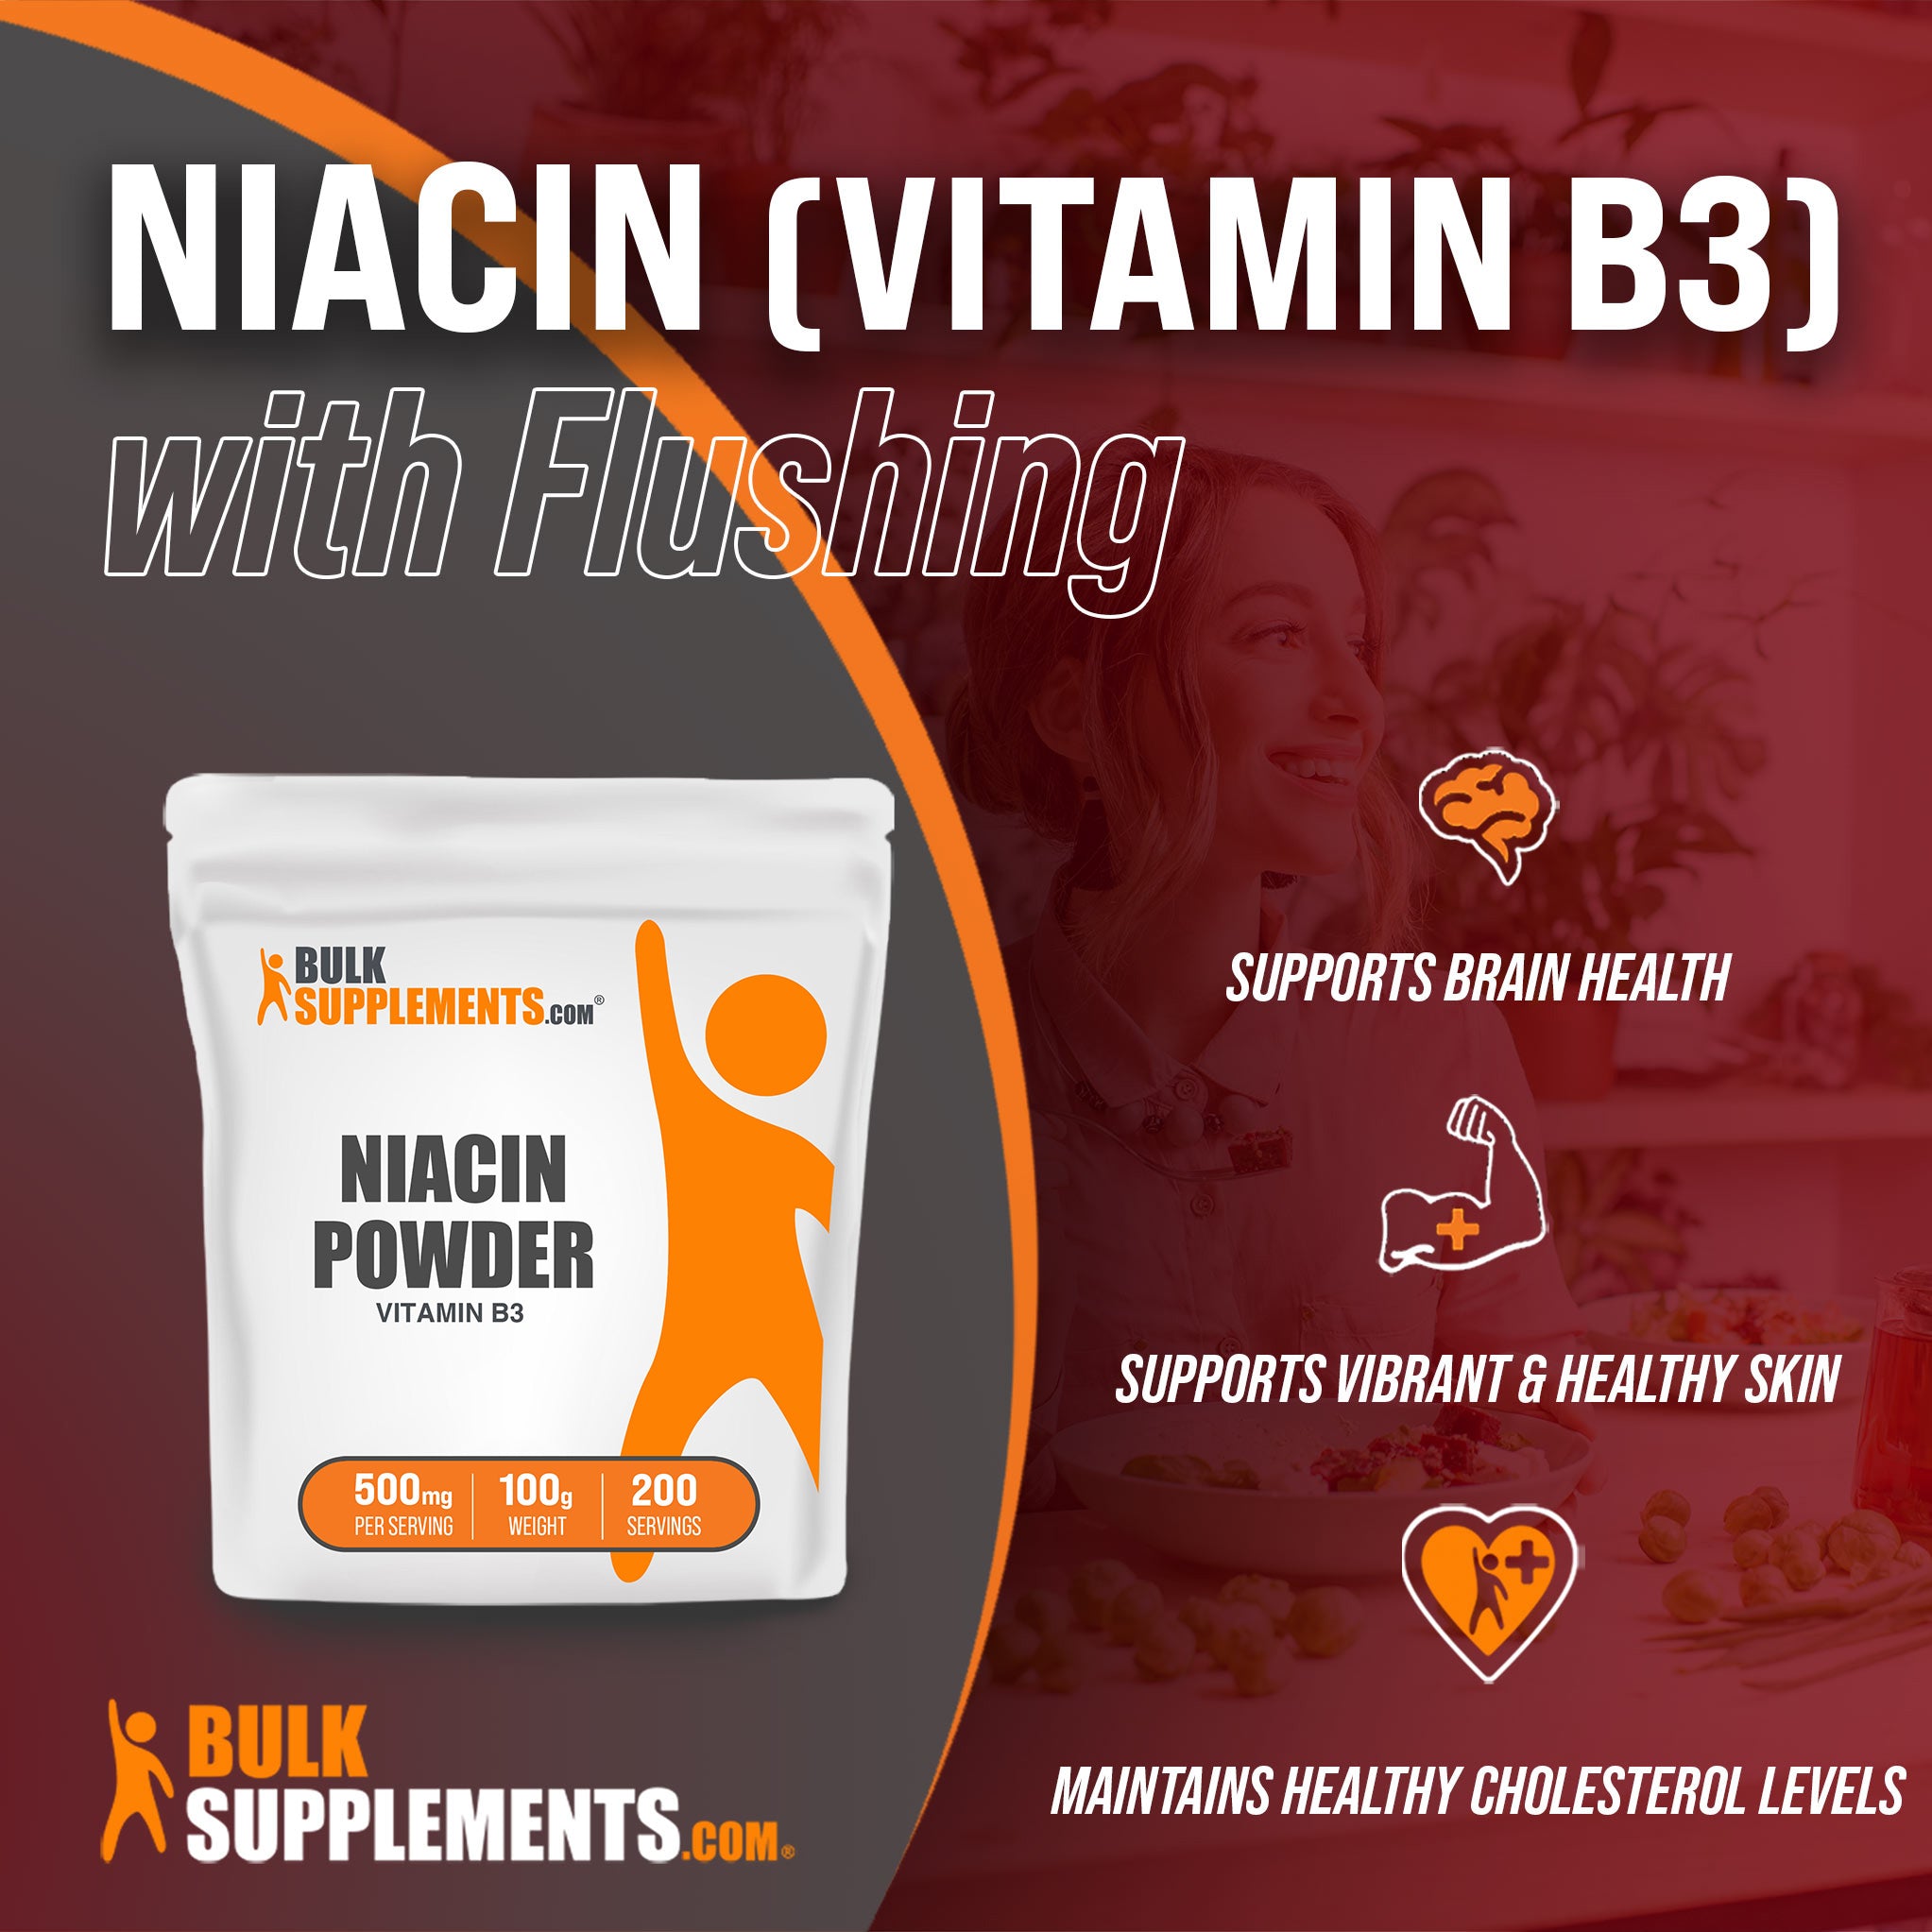 Benefits of Niacin Vitamin B3: supports brain health, supports vibrant and healthy skin, maintains healthy cholesterol levels